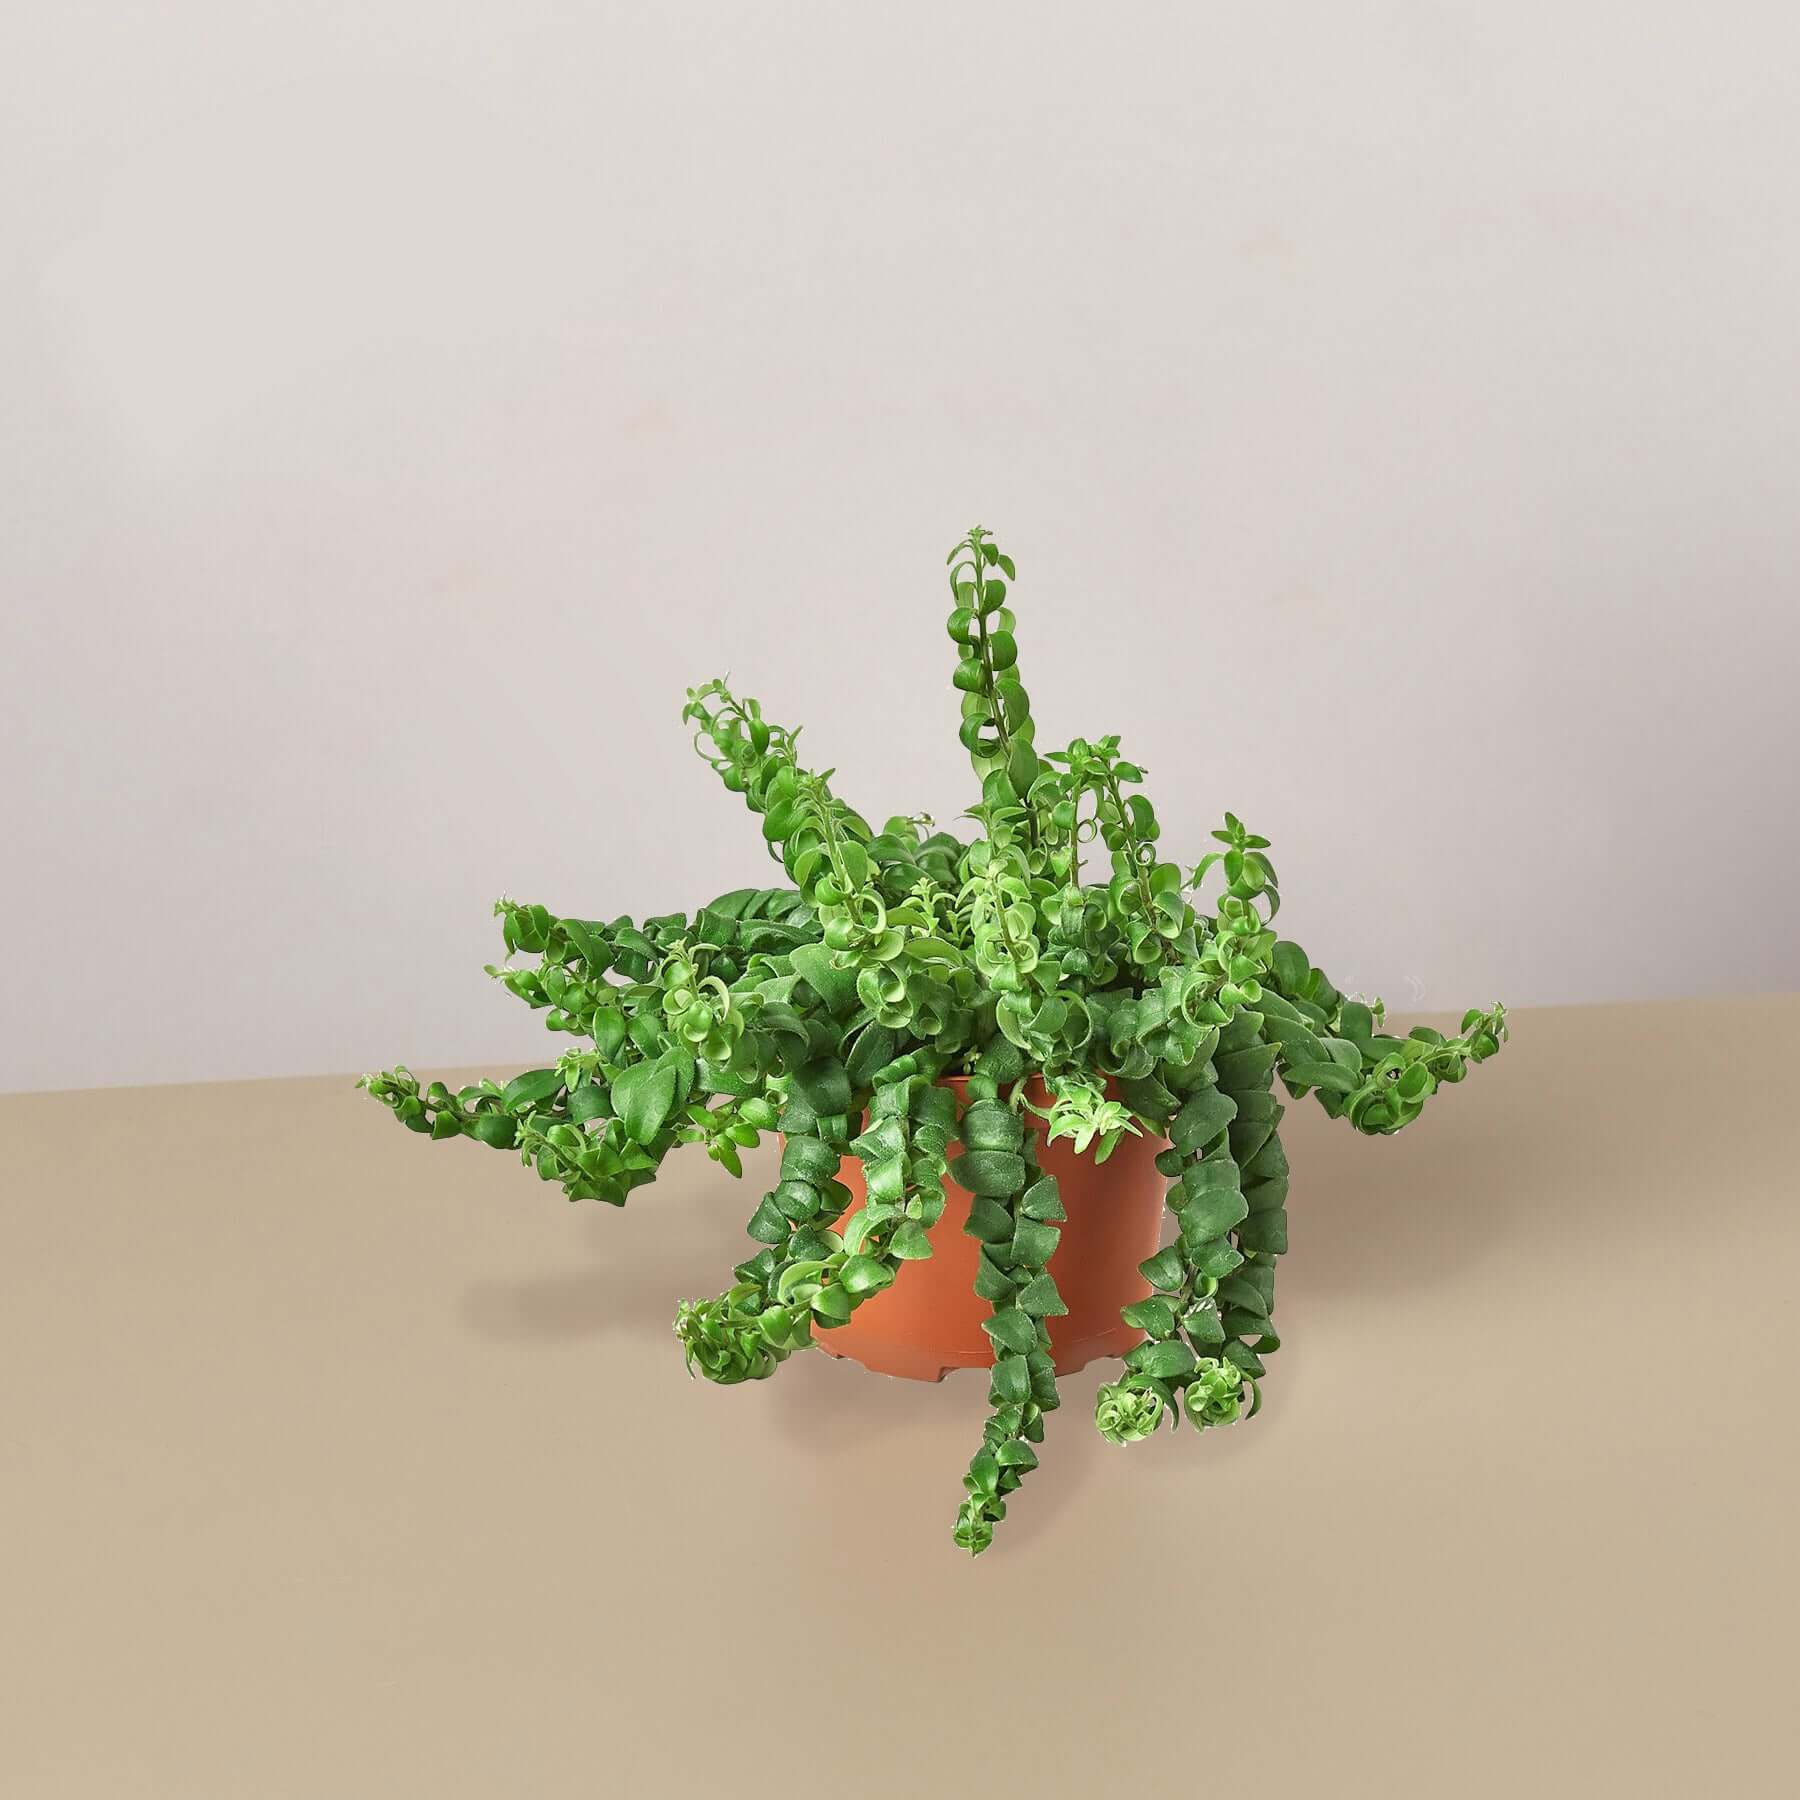 Curly Lipstick Plant | Modern house plants that clean the air